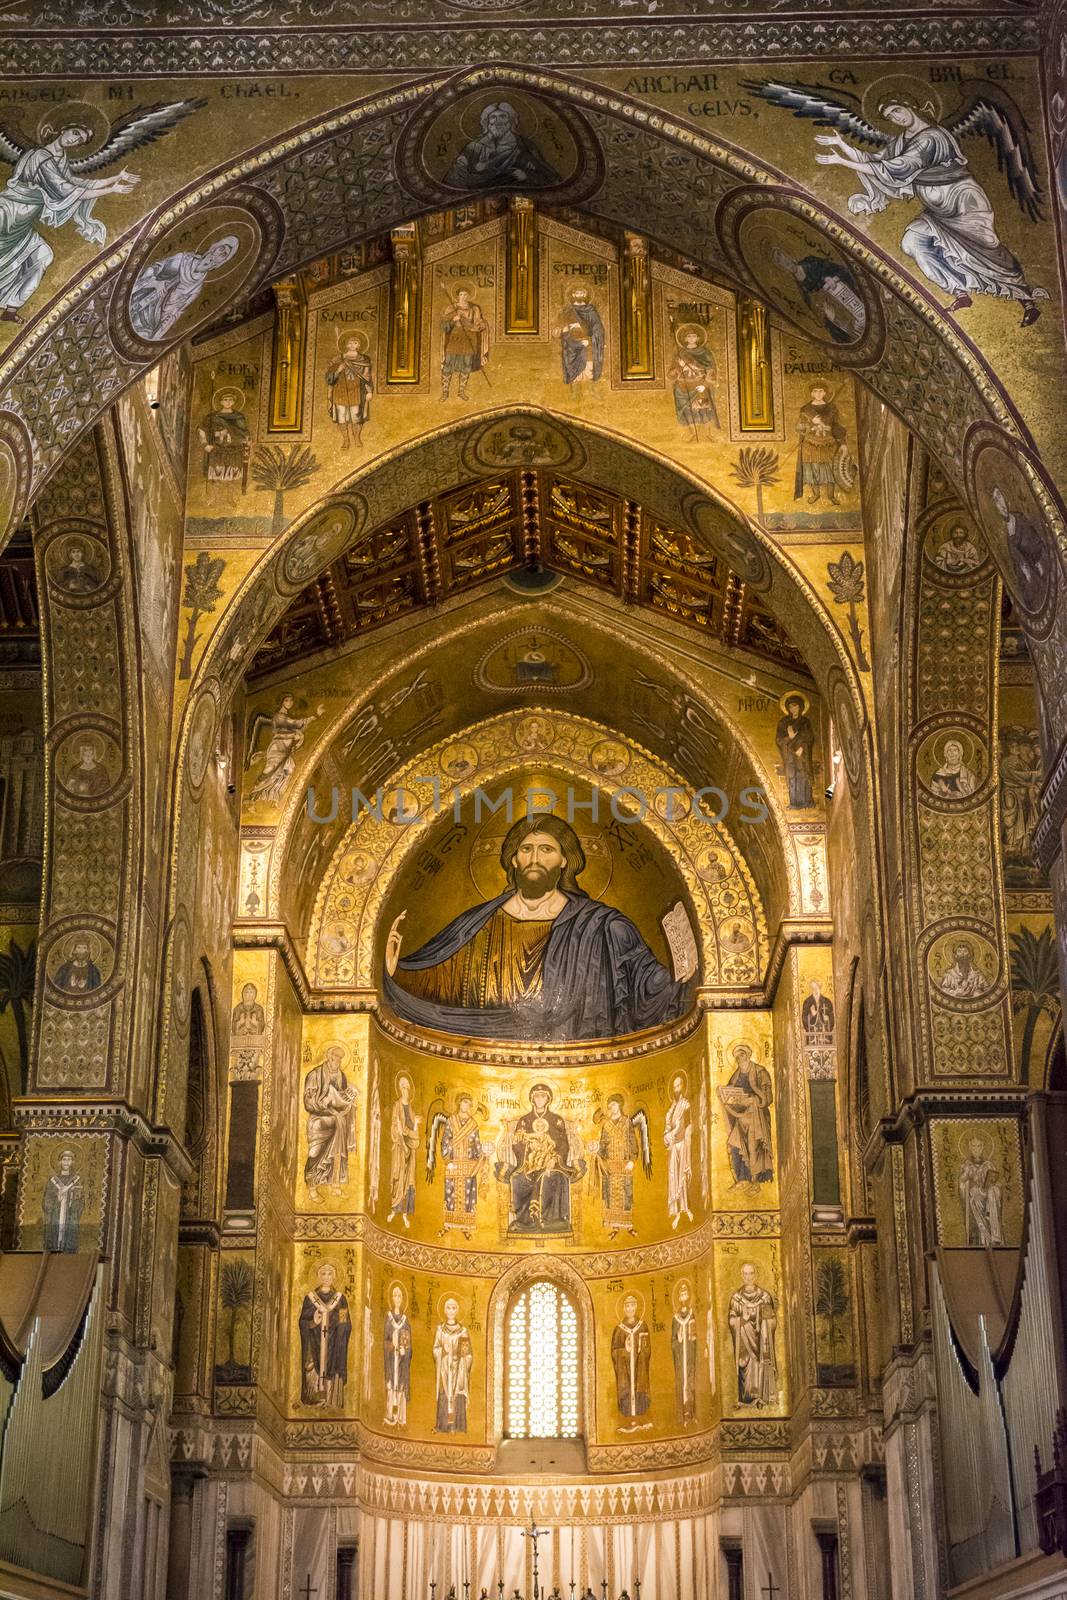 Interior of the cathedral Santa Maria Nuova of Monreale in Sicily, Italy by ankarb